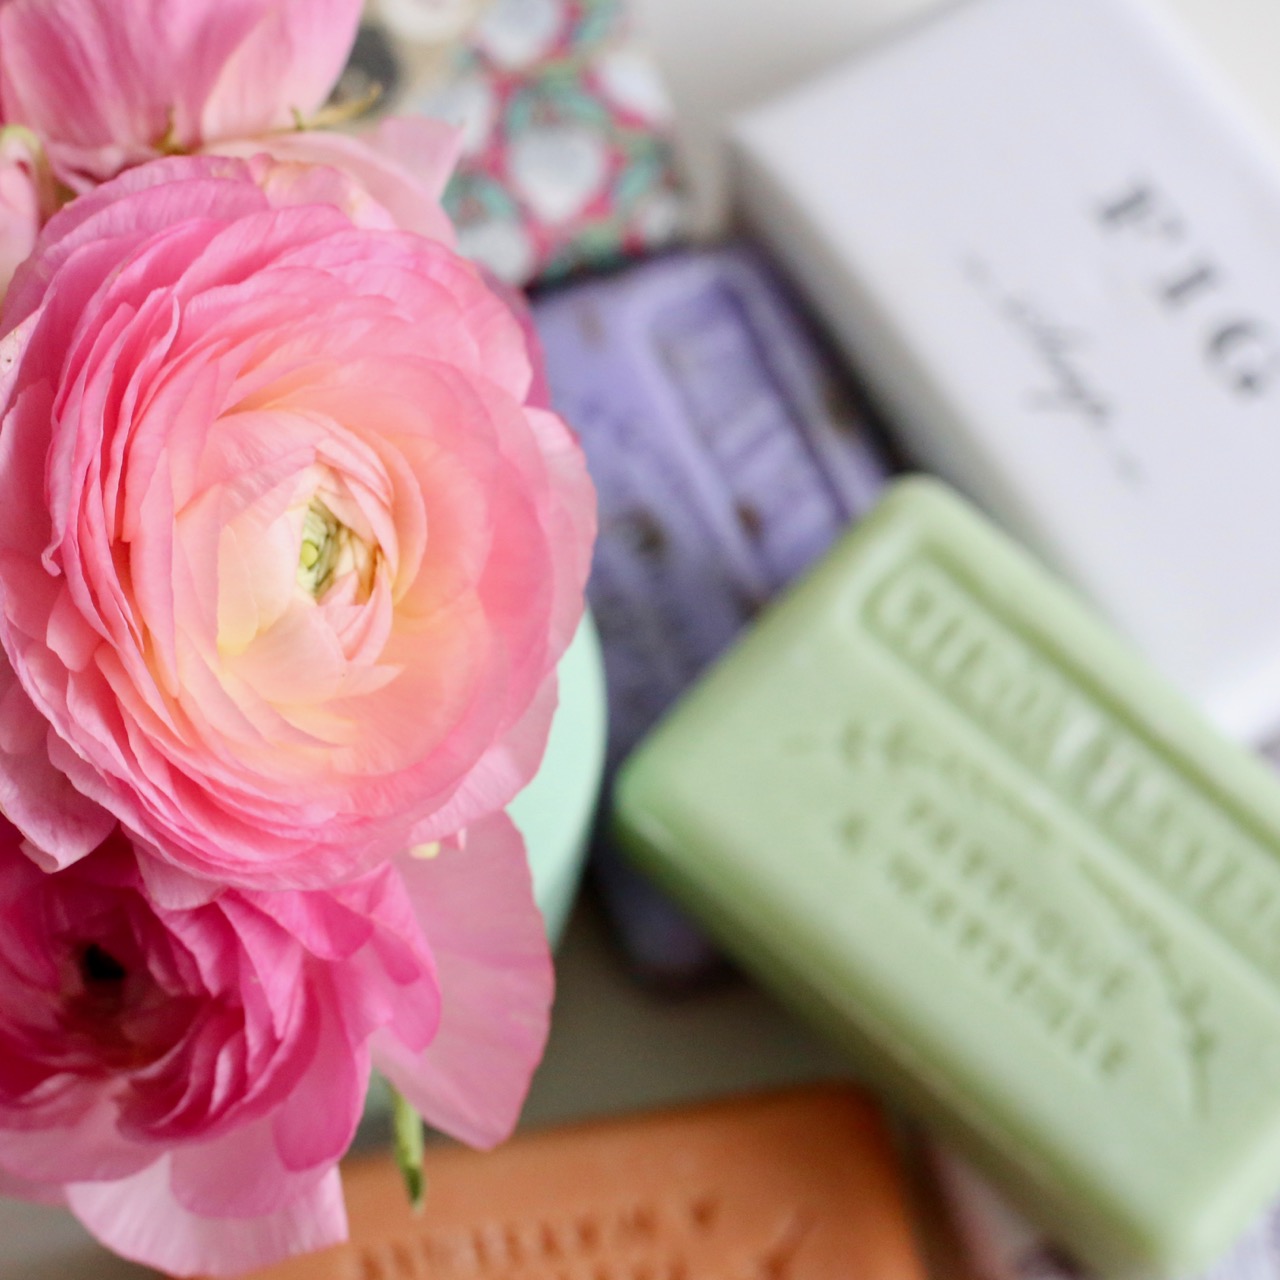 Living more thoughtfully: use traditional soap